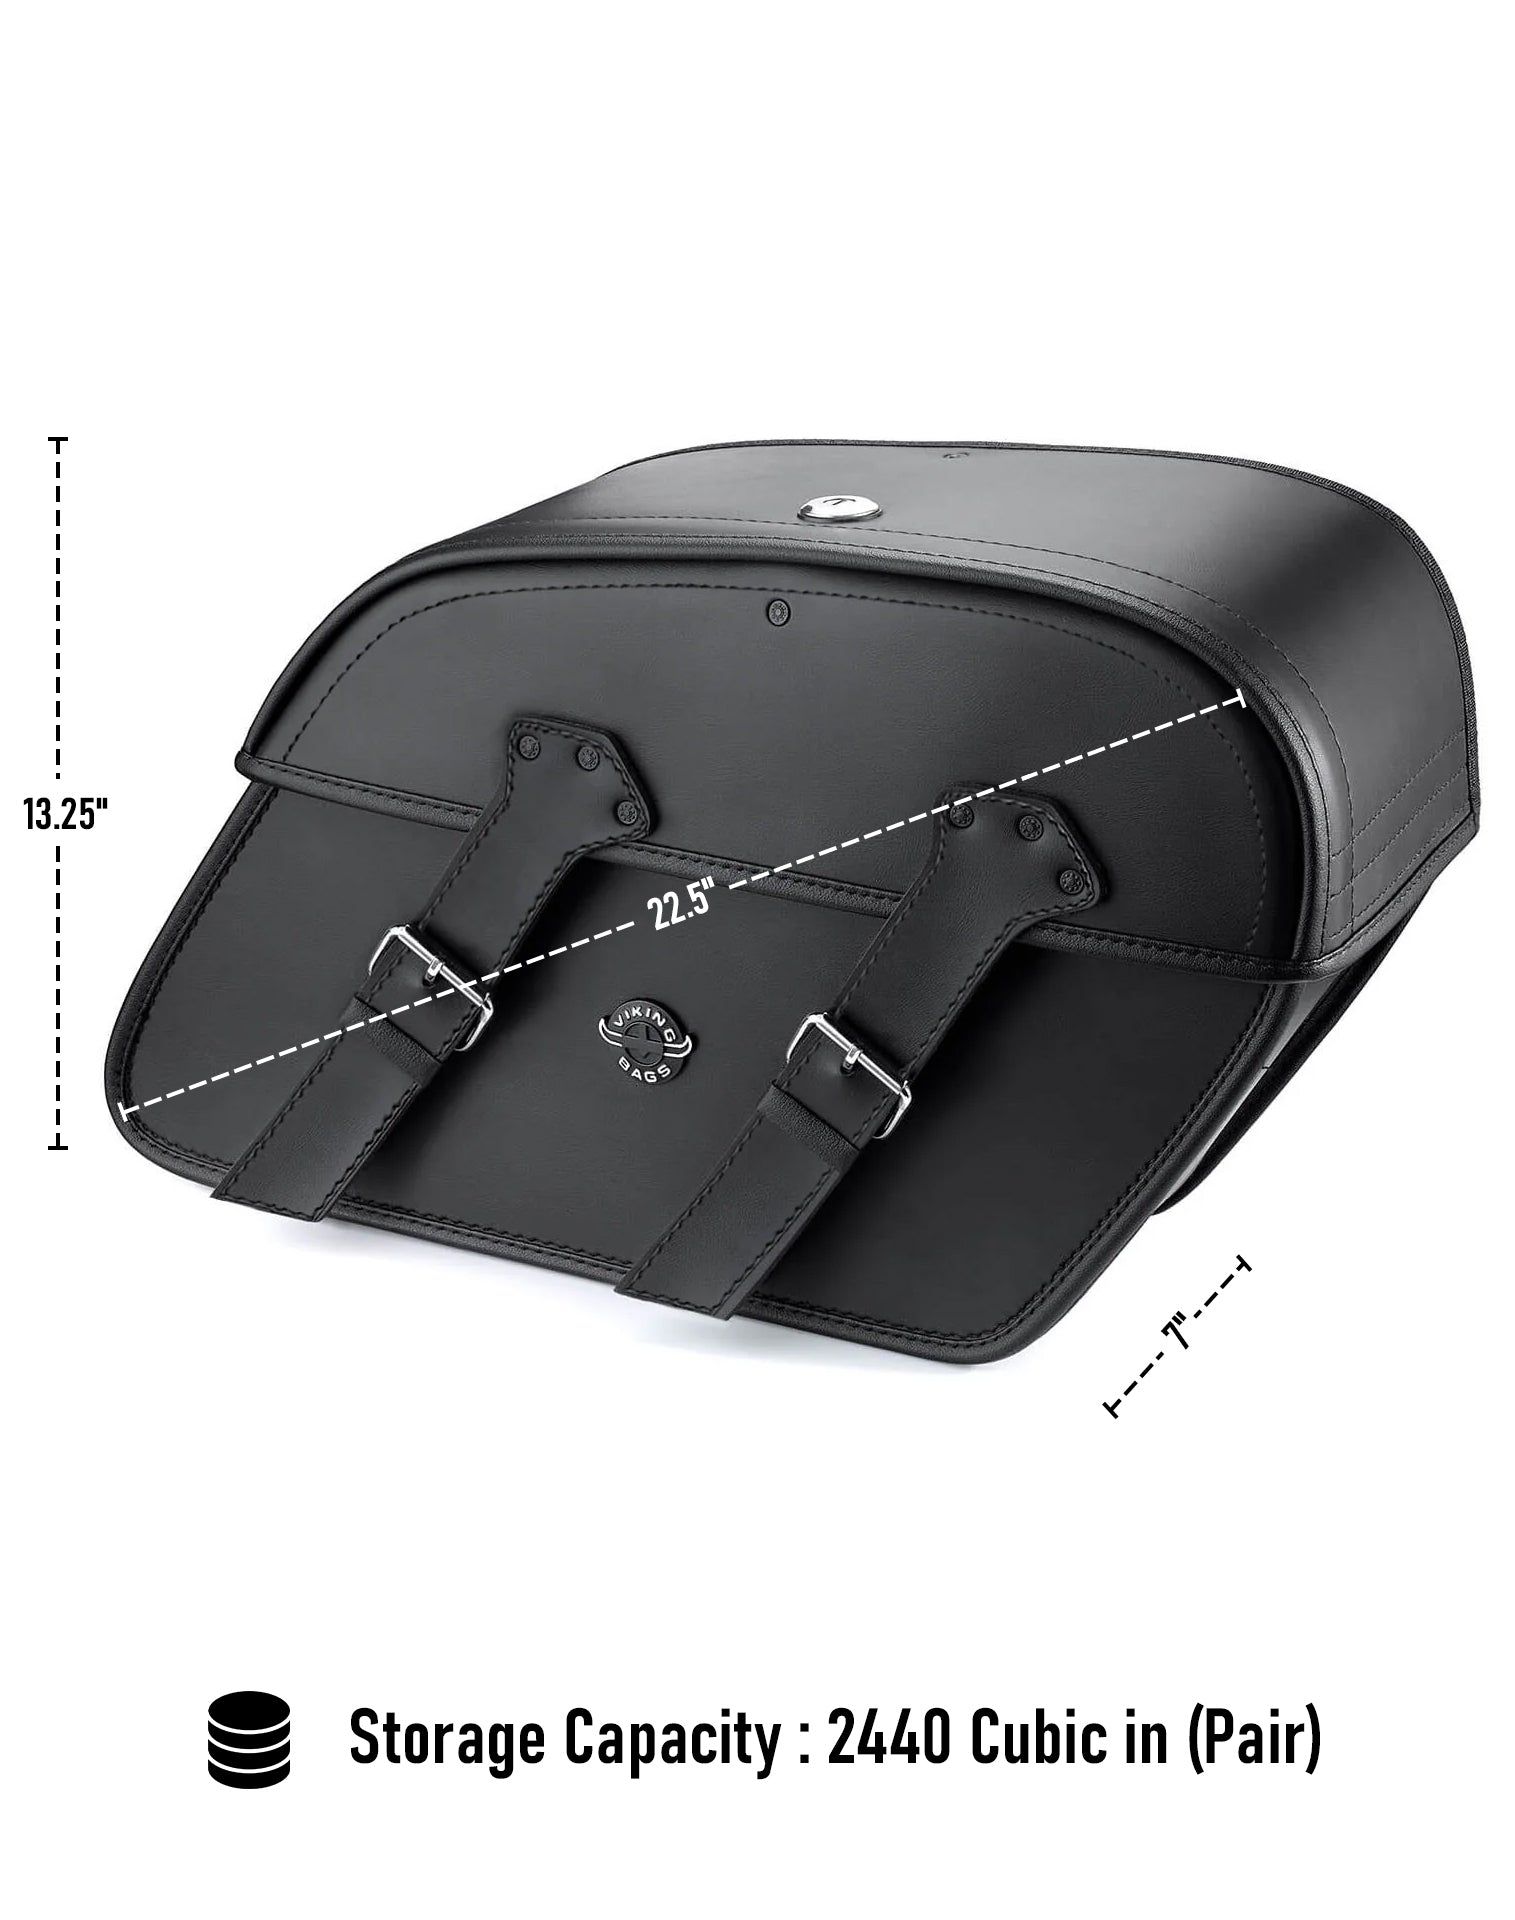 Viking Raven Extra Large Suzuki Boulevard M109 Vzr1800 Leather Motorcycle Saddlebags Can Store Your Ridings Gears